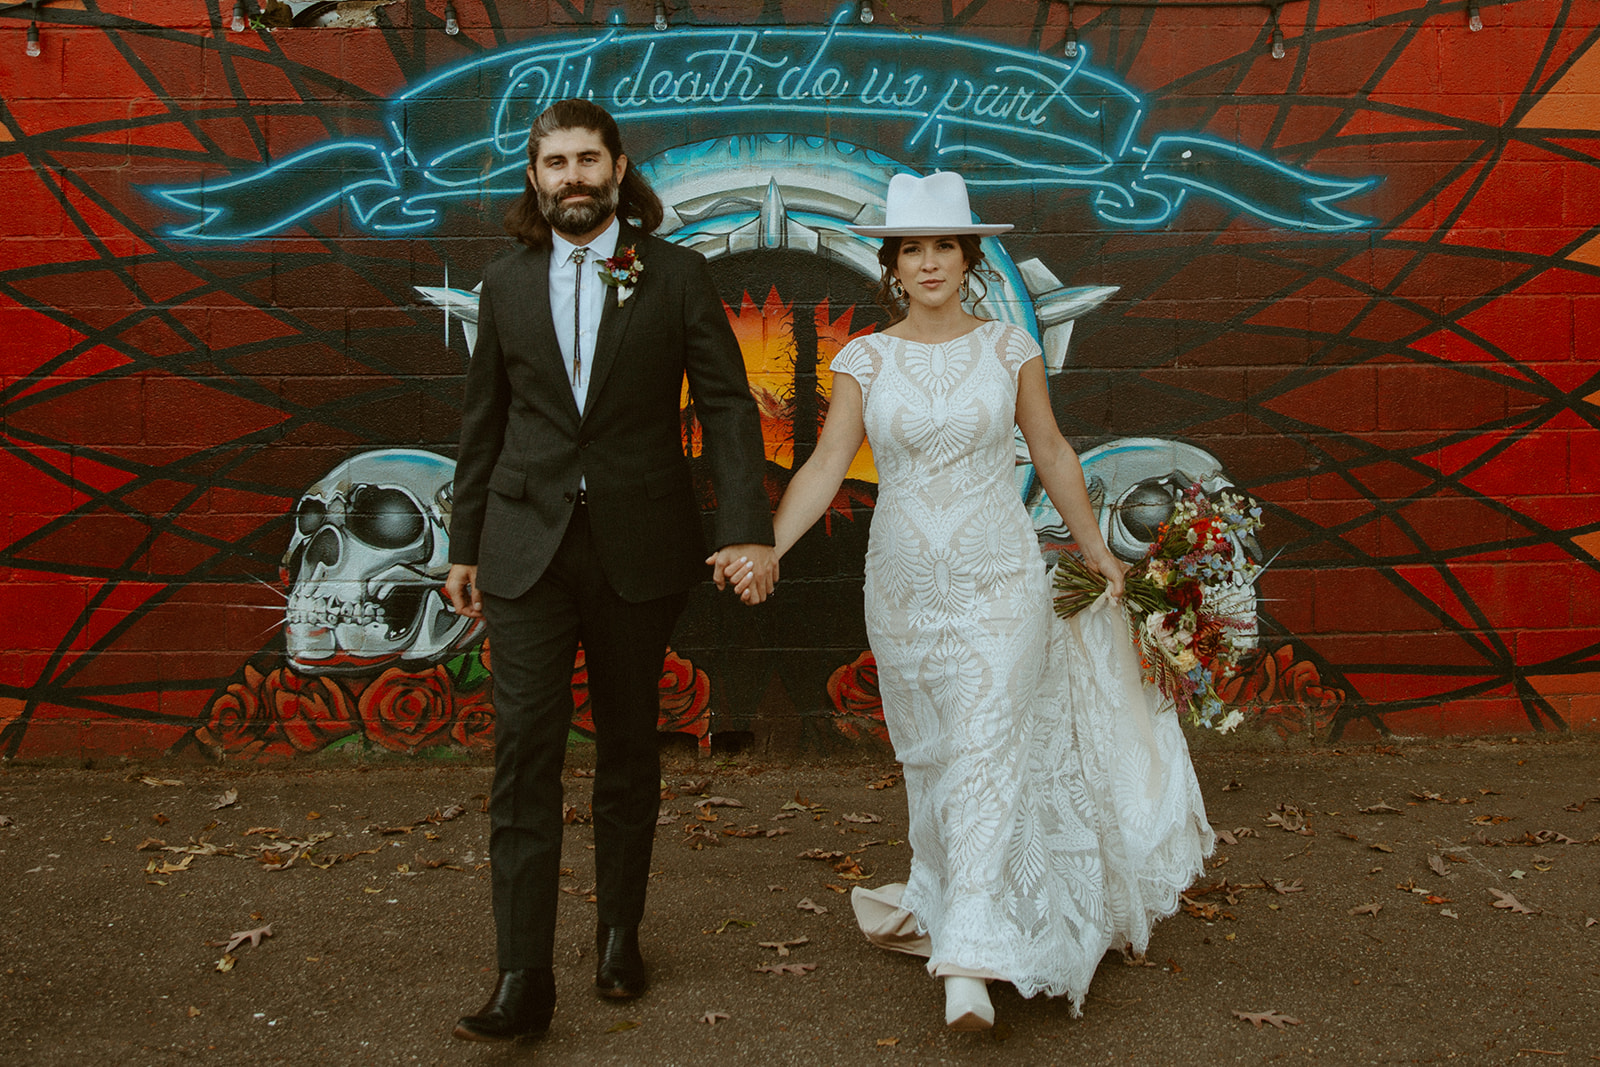 A bride and groom stand in front of a mural that says "Til death do us part."